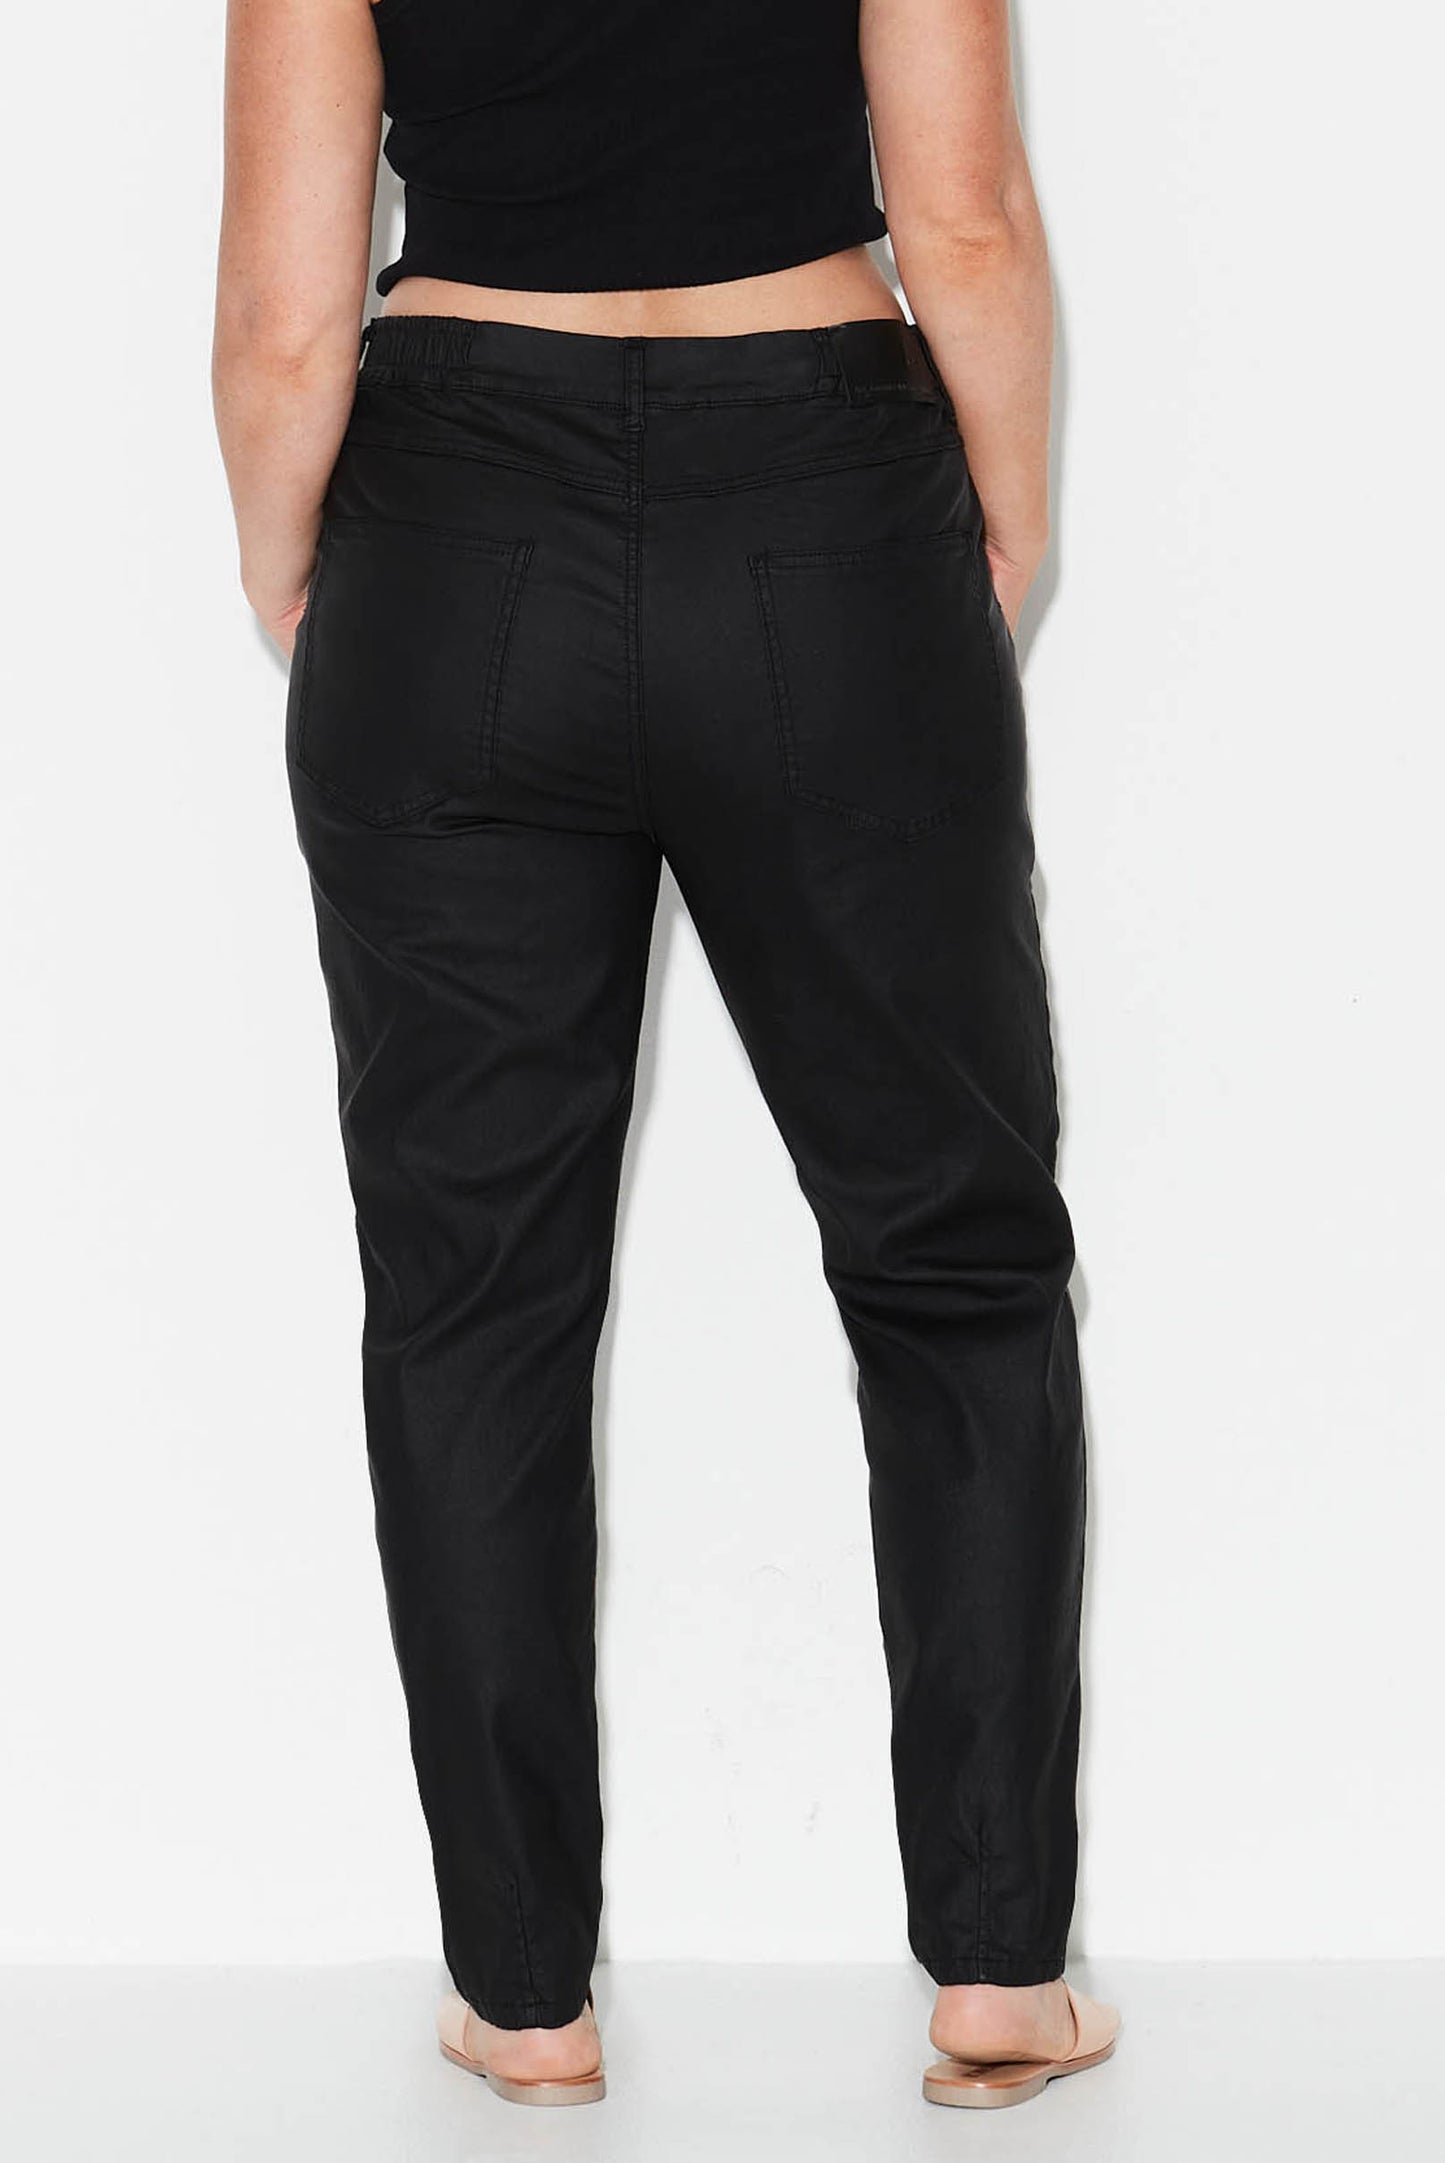 Shakers Patch Pocket Jeans- Coated